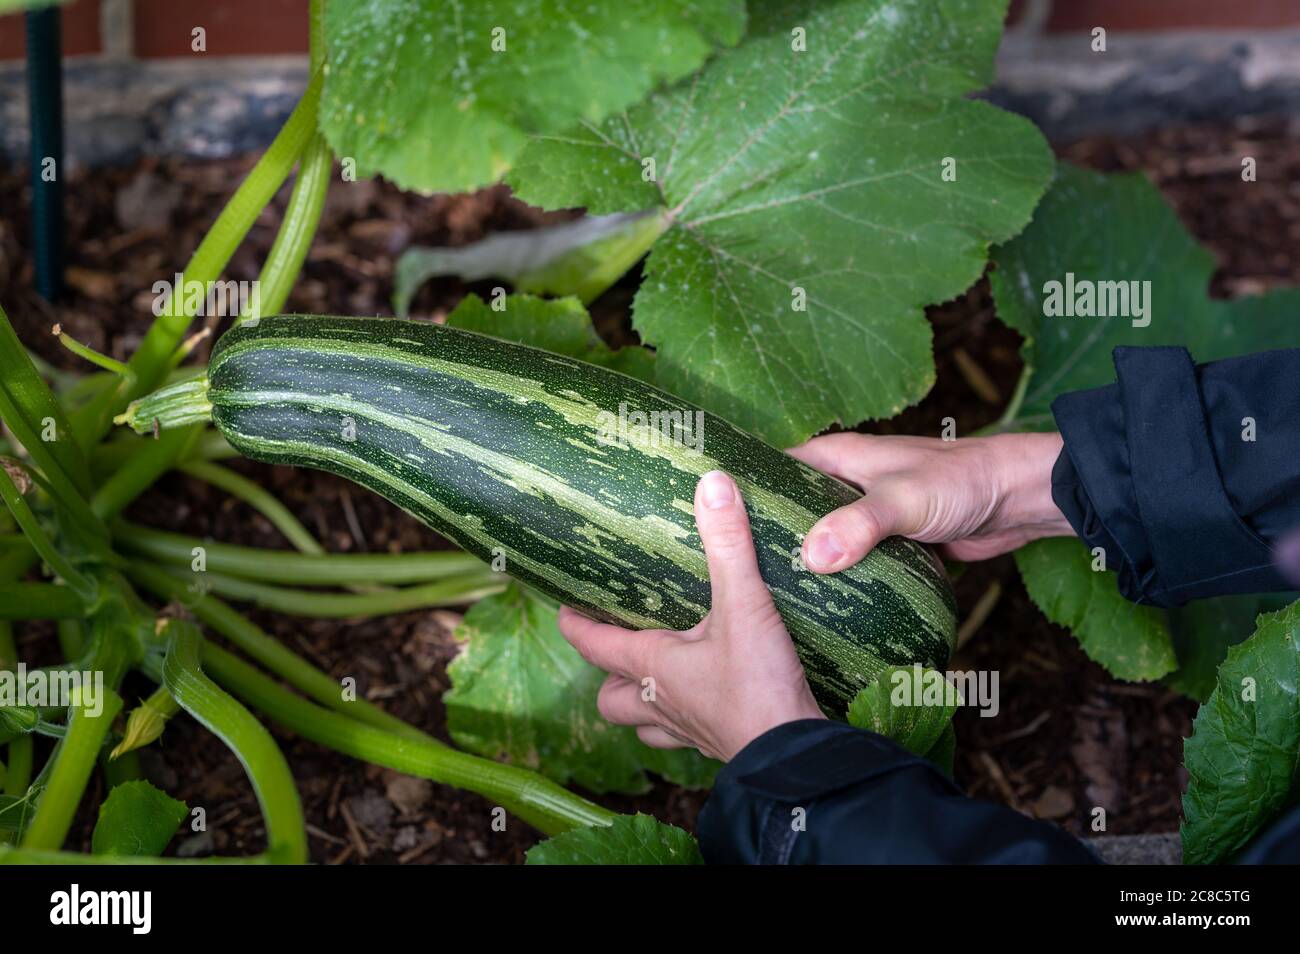 A gardener is harvesting a Zucchini in the own garden. Stock Photo